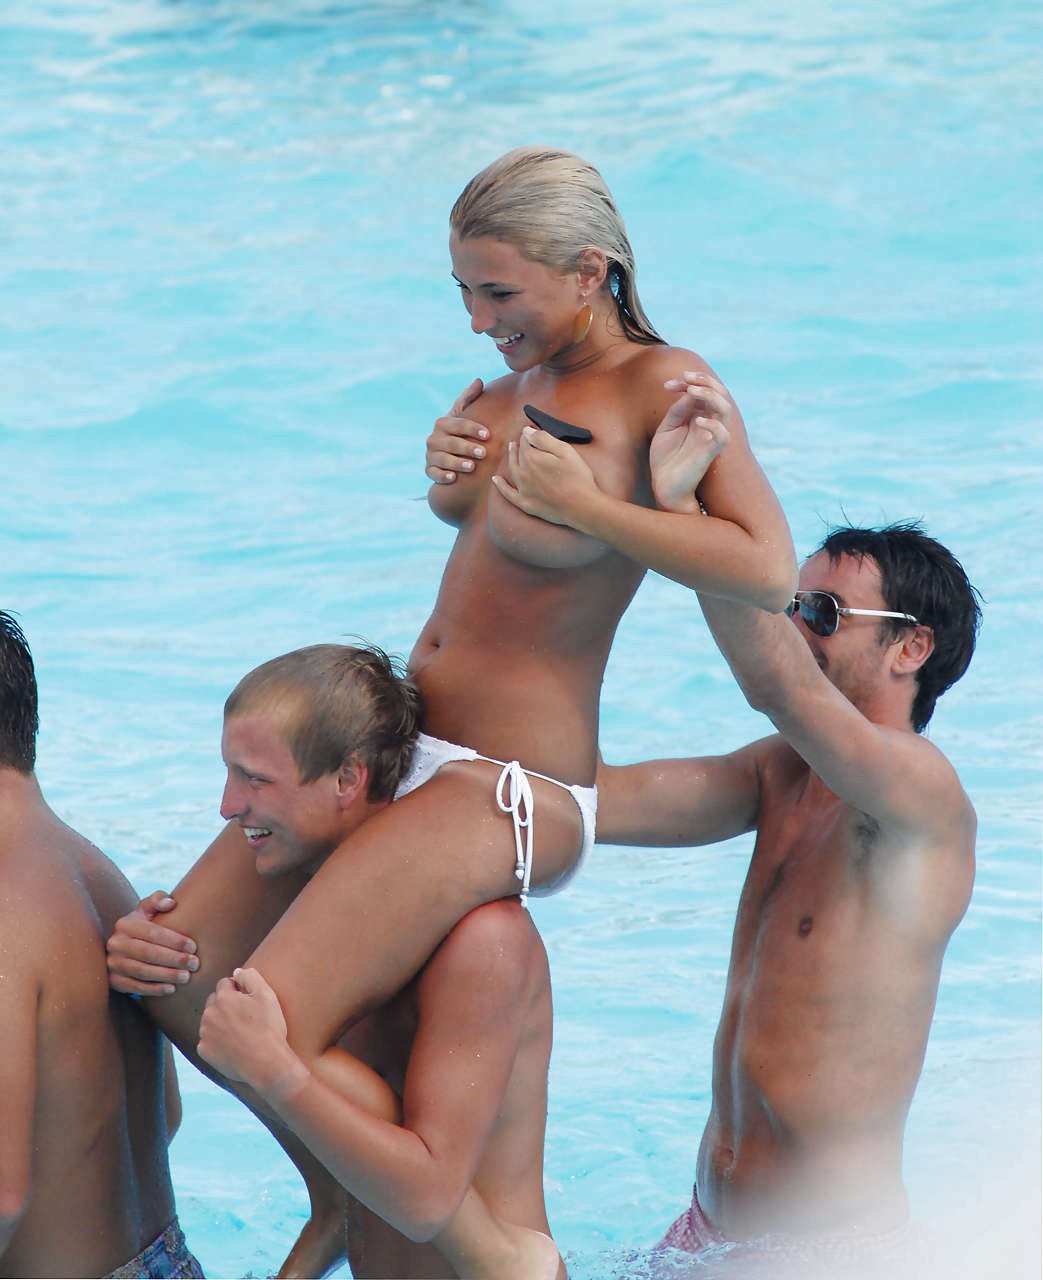 Billie Faiers showing her big tits while have fun in pool paparazzi pictures #75291802